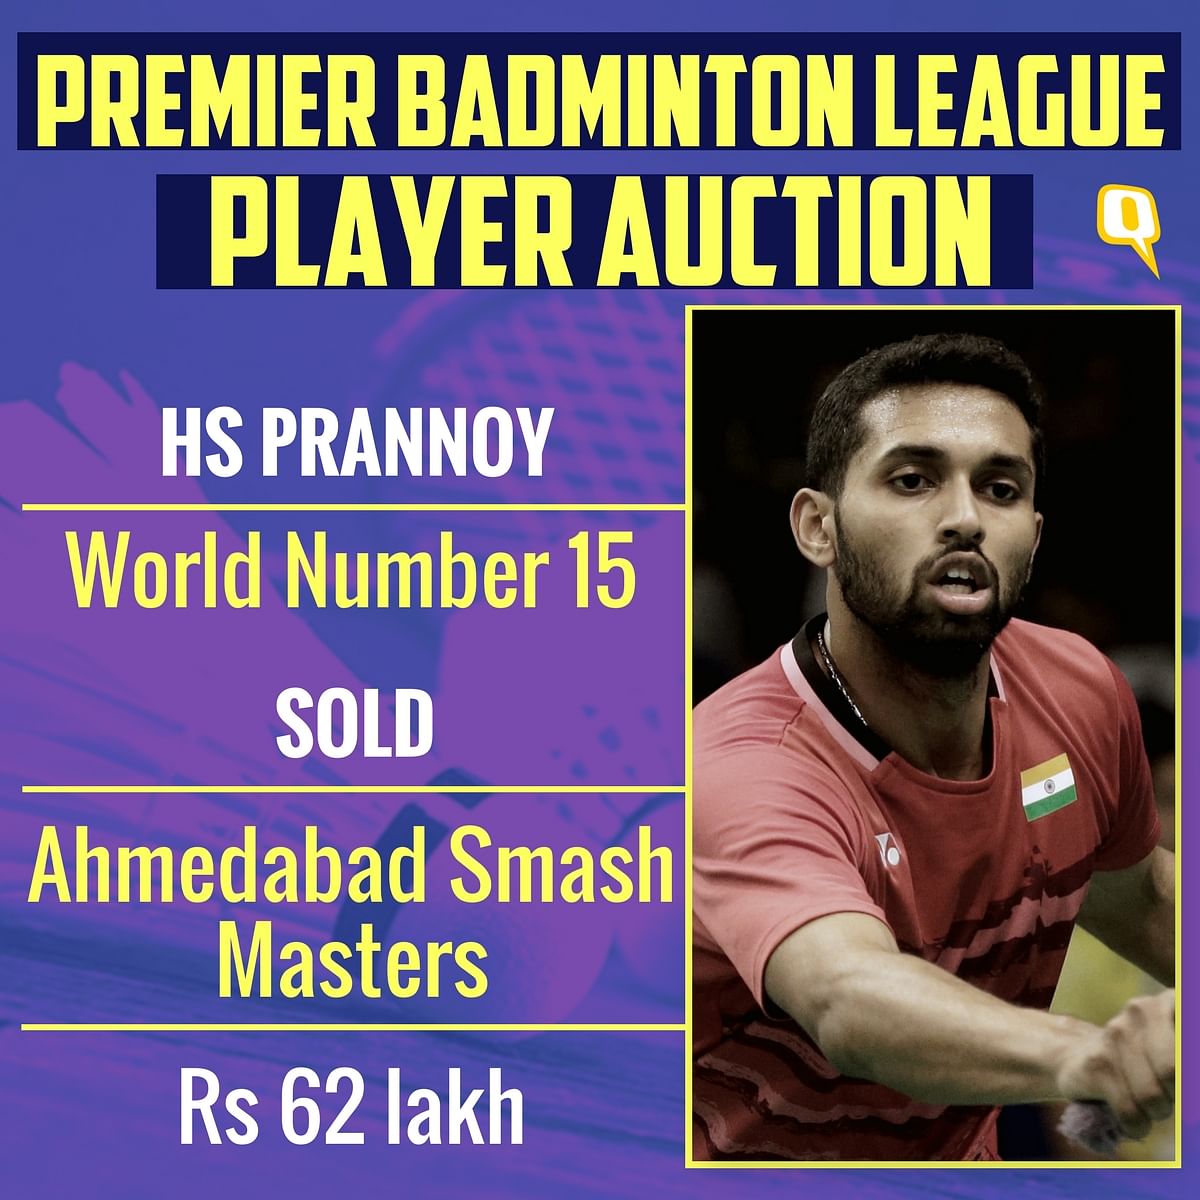 LIVE UPDATES from the Premier Badminton League auction where Sindhu, Saina, Marin are going under the hammer.